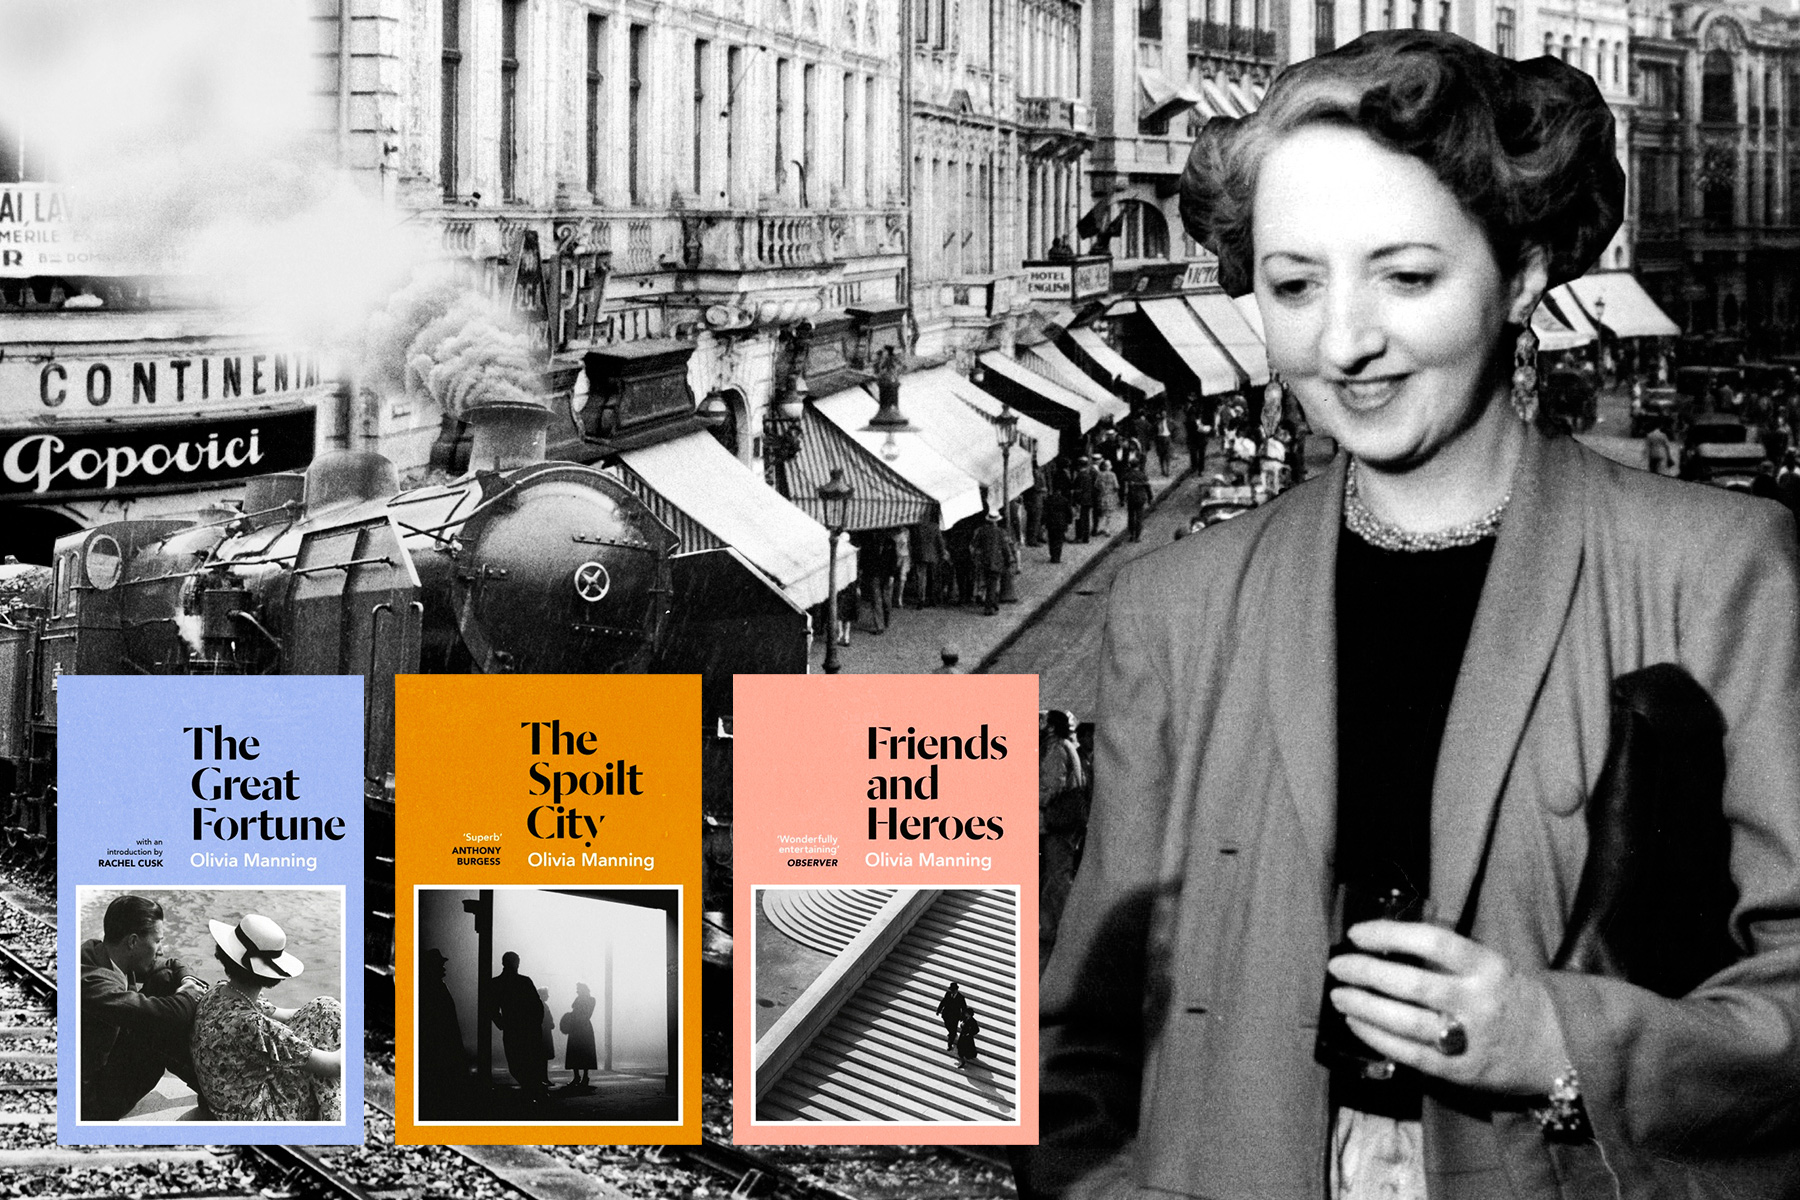 A collage of a black-and-white photograph of Olivia Manning against a background of Bucharest, with book covers